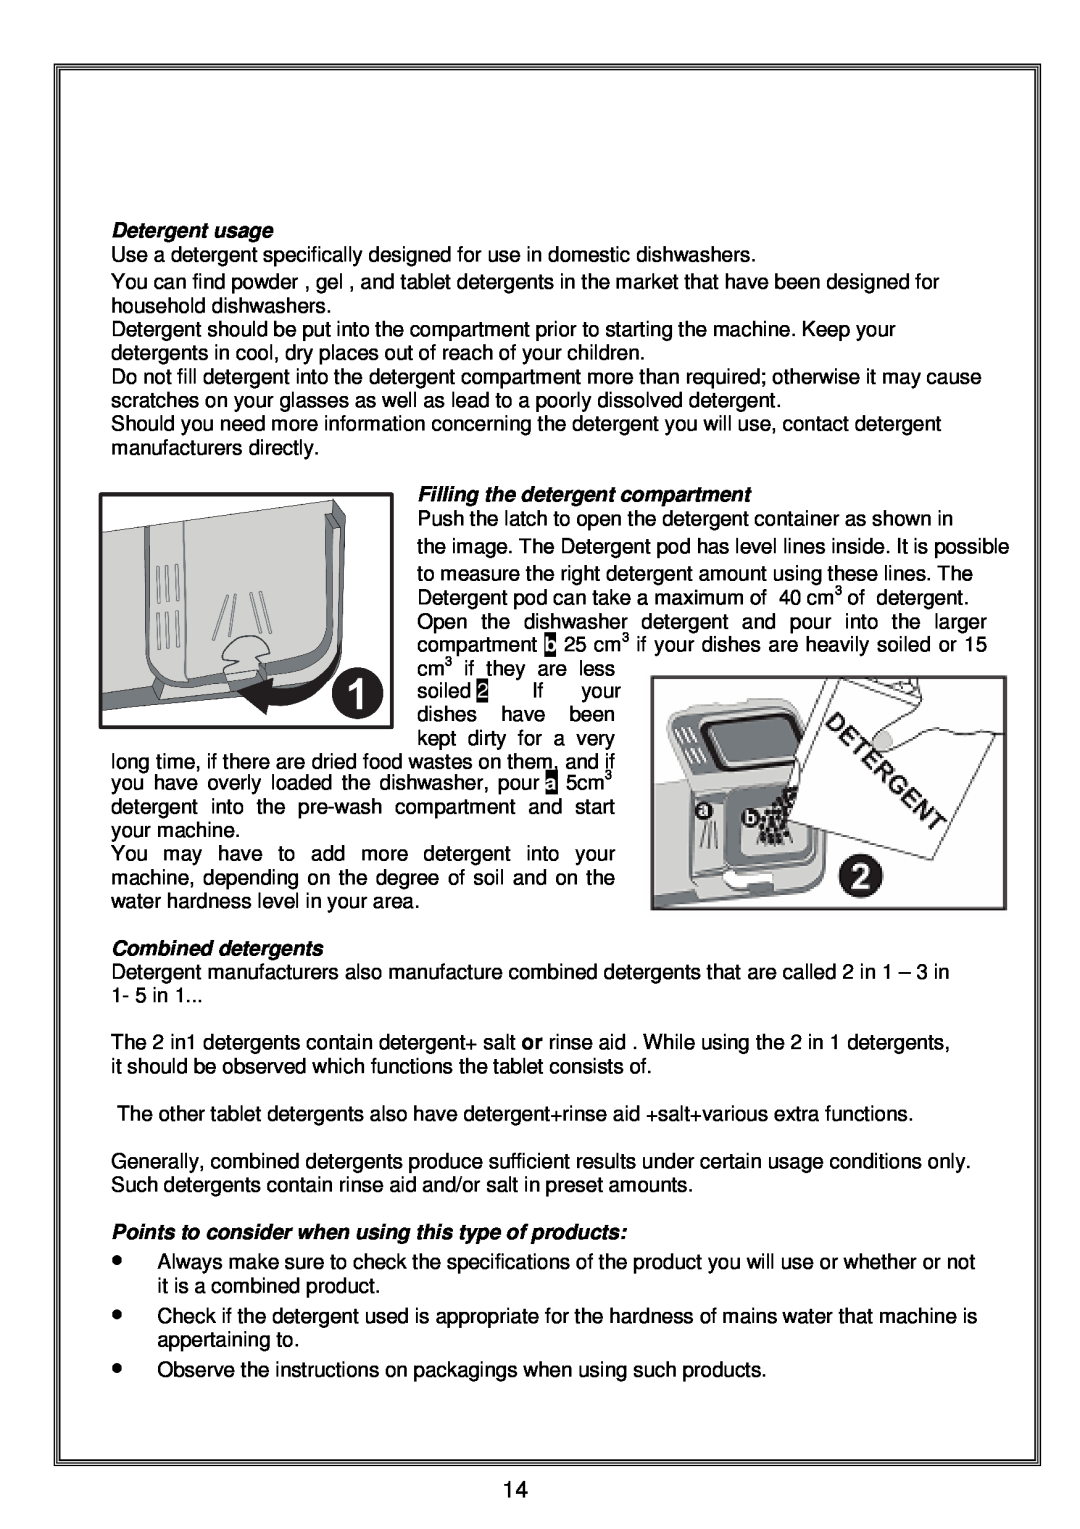 Russell Hobbs RHDW1 instruction manual Detergent usage, Filling the detergent compartment, Combined detergents, dishes 